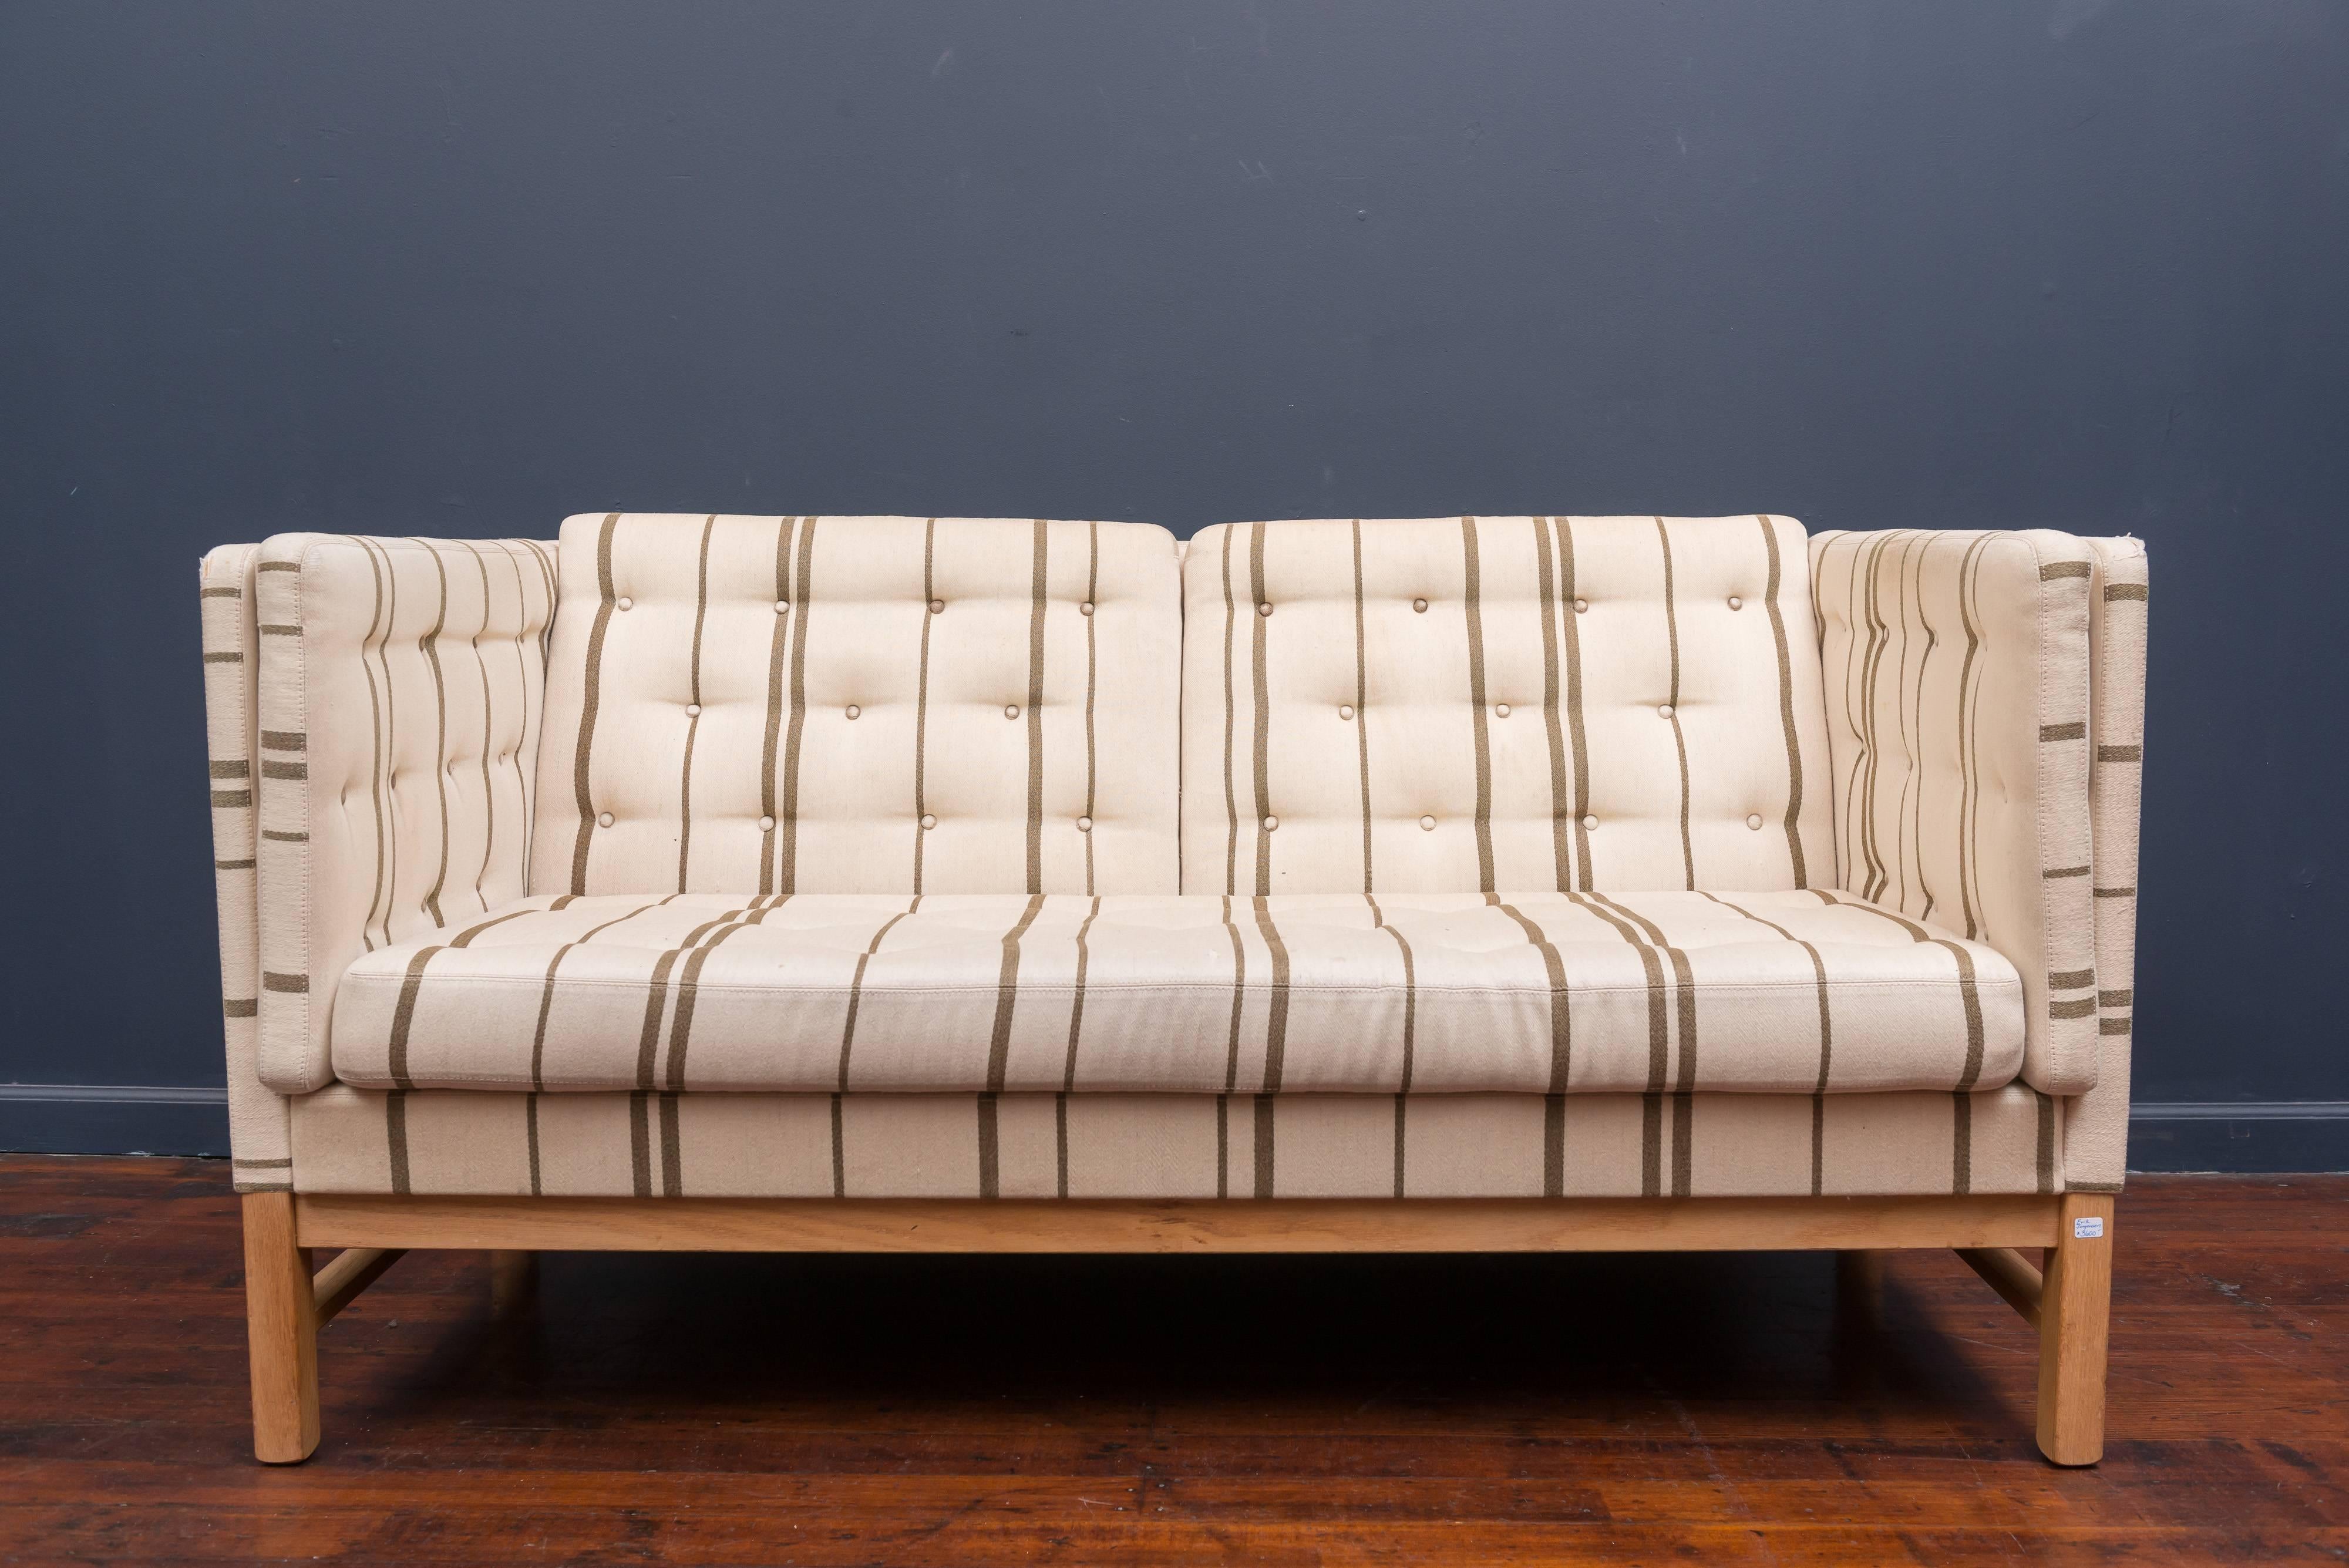 Erik Ole Jorgensen design small sofa. High quality love seat or small sofa designed by Erik Ole Jørgensen for Svendborg, Denmark. Oak frame with original vintage upholstery that has been professionally cleaned but shows wear and tear with some